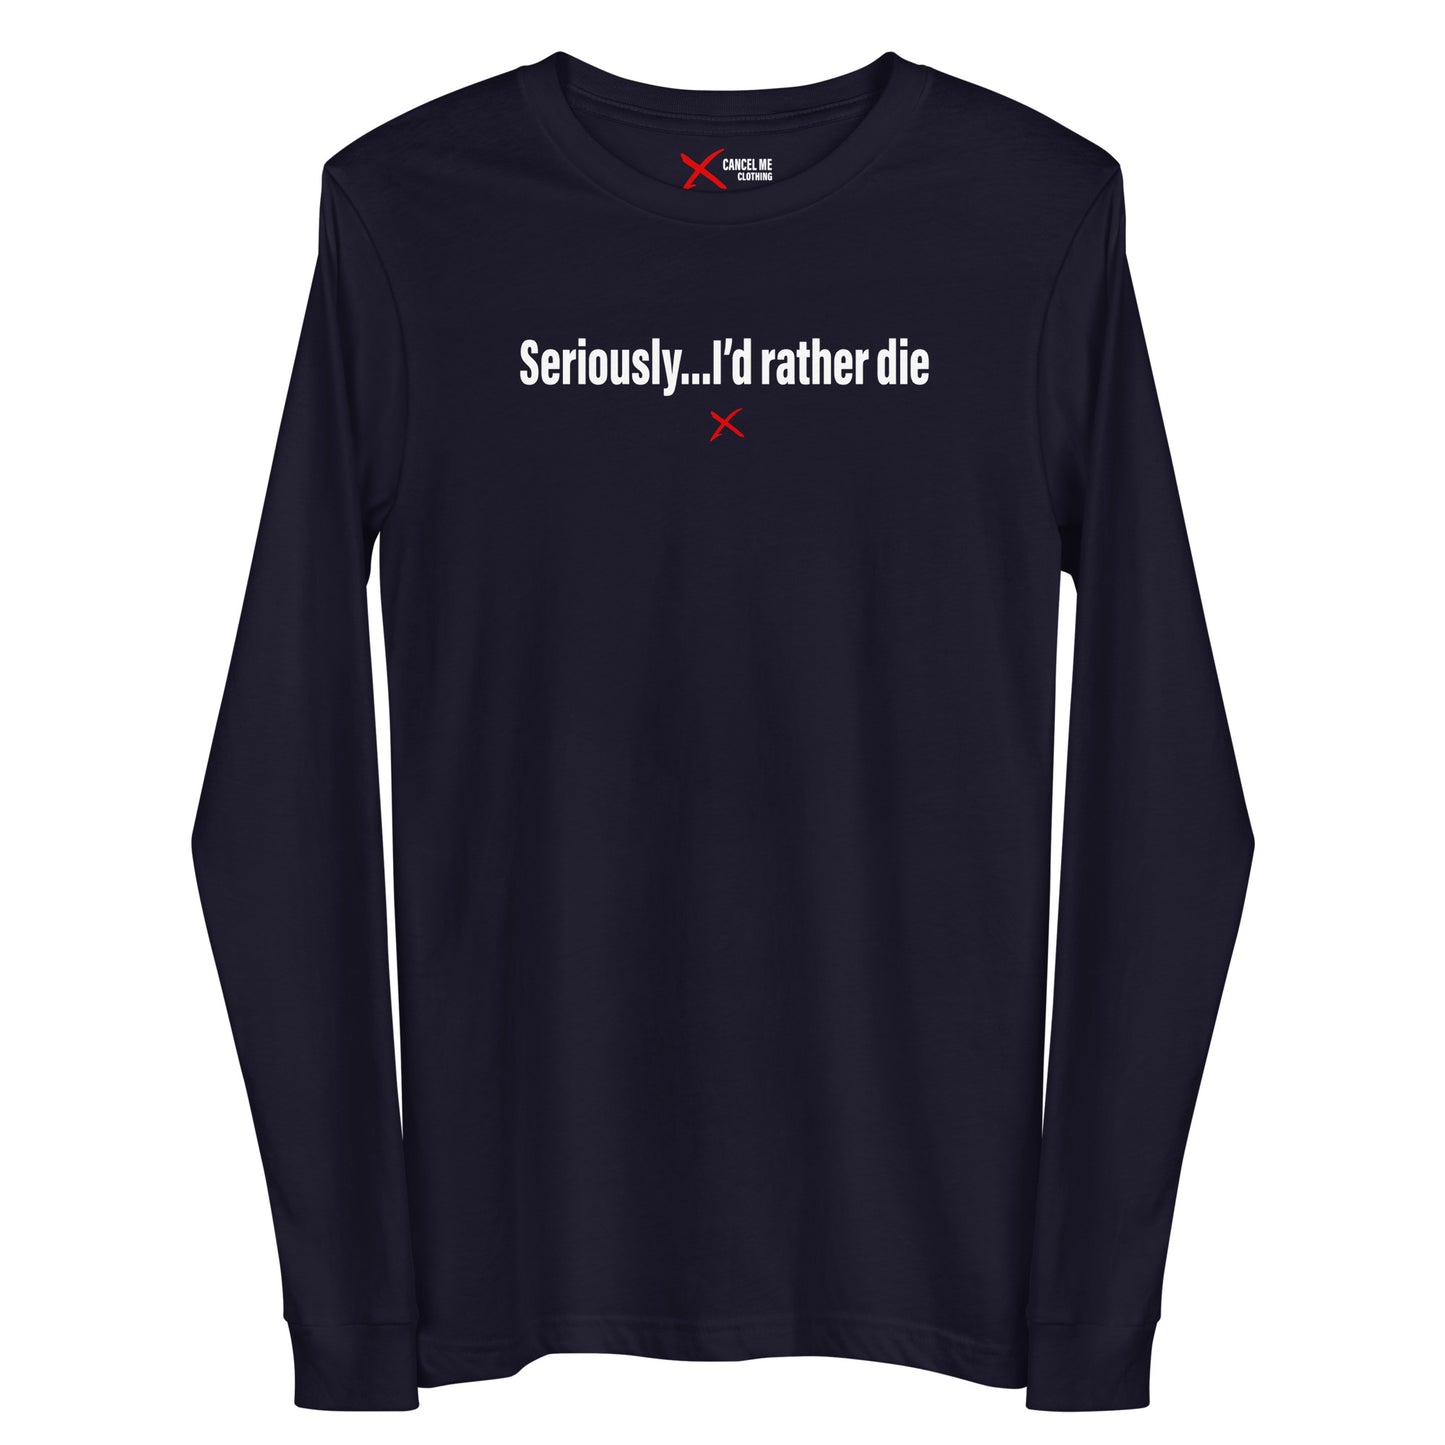 Seriously...I'd rather die - Longsleeve